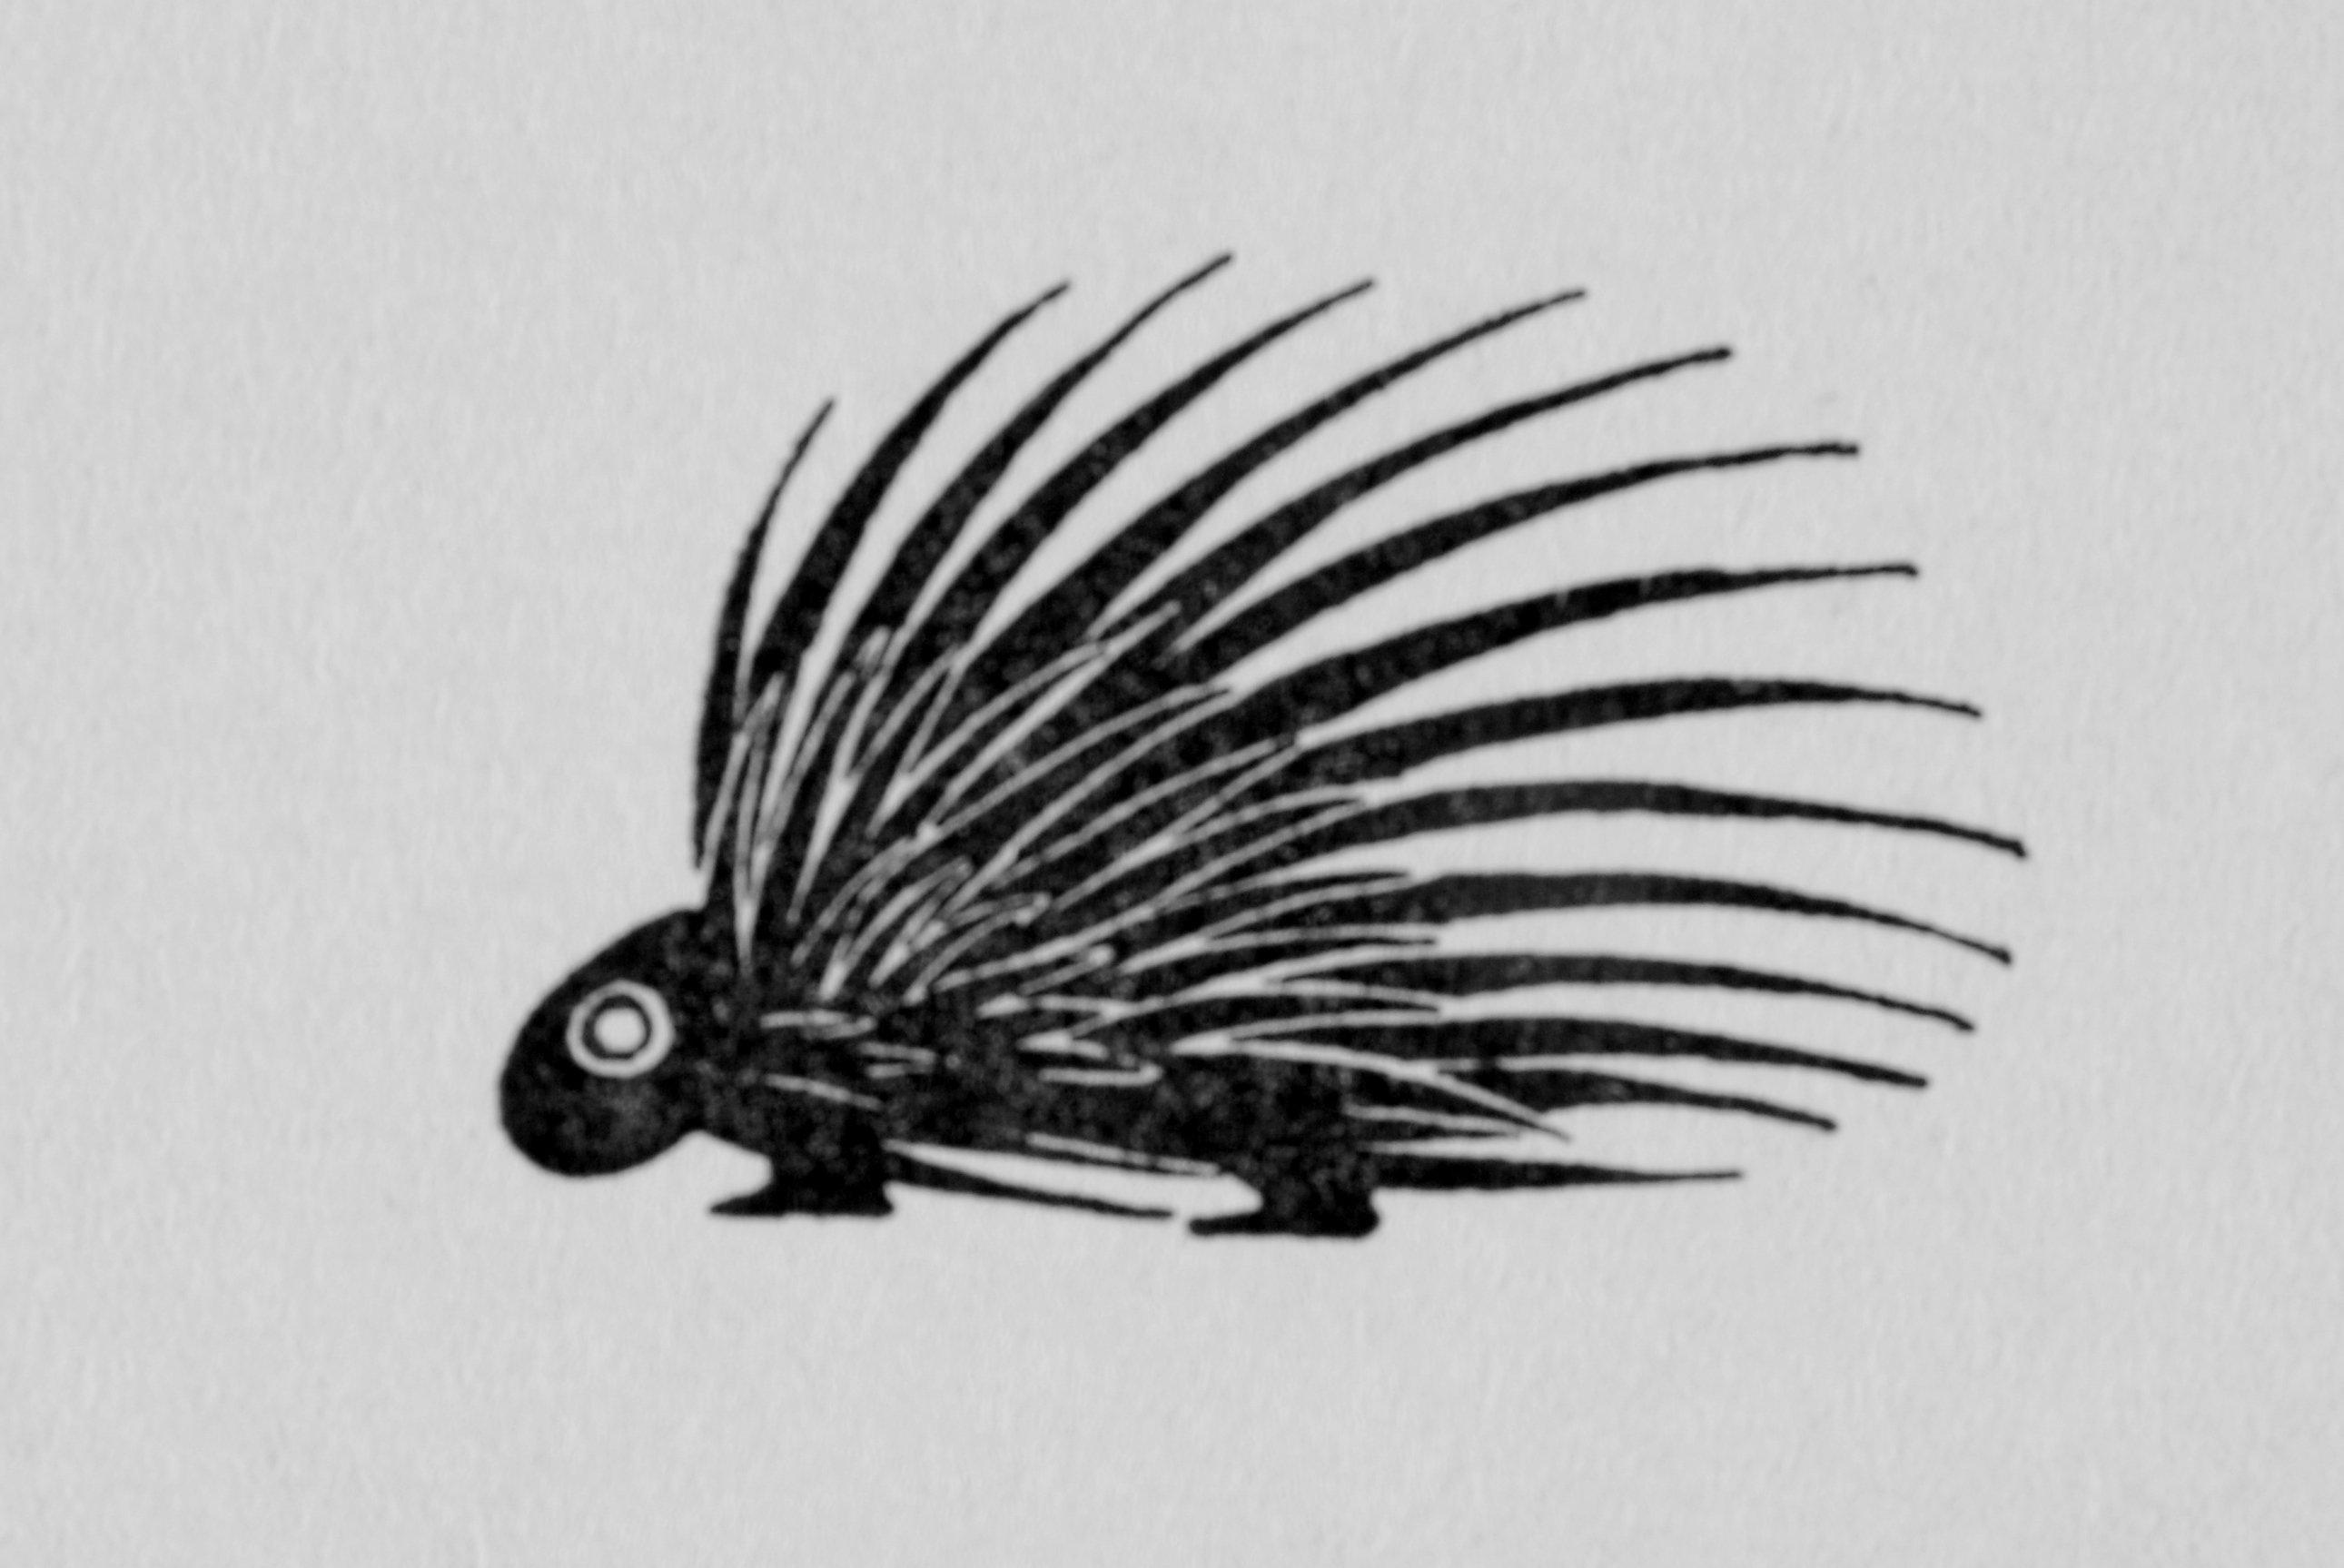 Wharton's porcupine woodcut from D.H. Lawrence's Reflections on the Death of a Porcupine, 1925.